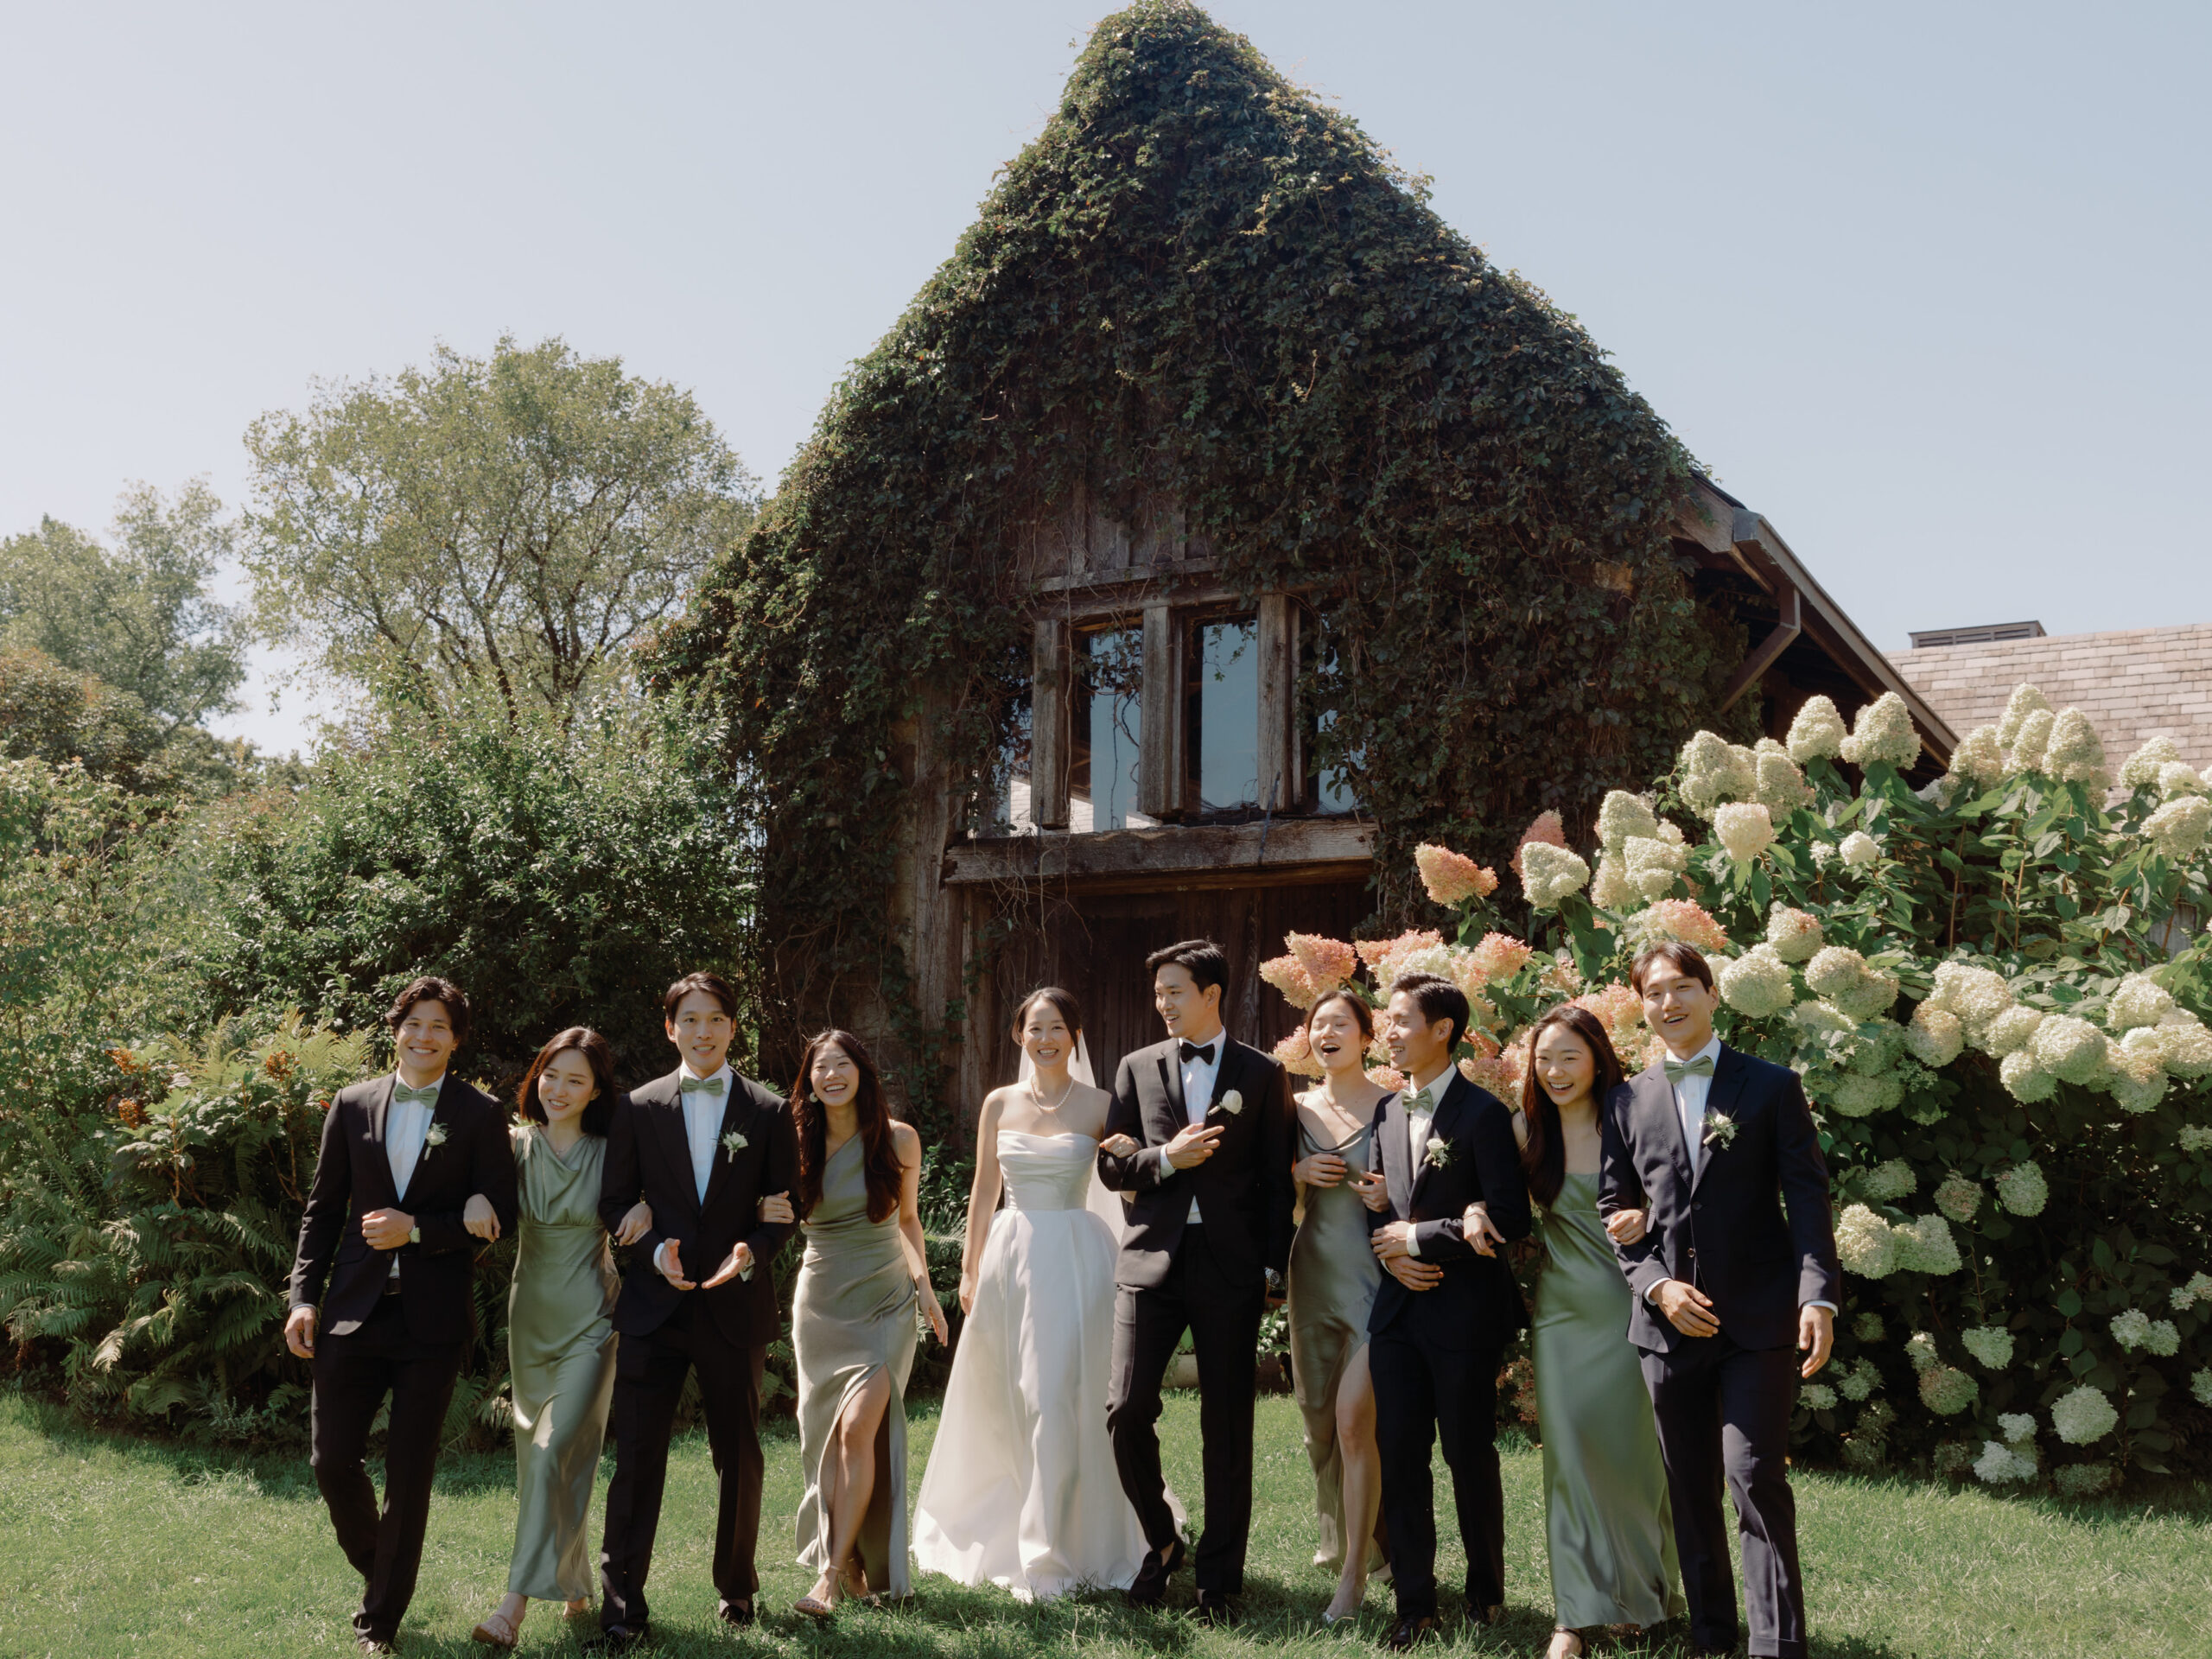 The newlyweds, together with their bridesmaids and groomsmen are having fun posing for photos. Photojournalistic wedding photography image by Jenny Fu Studio